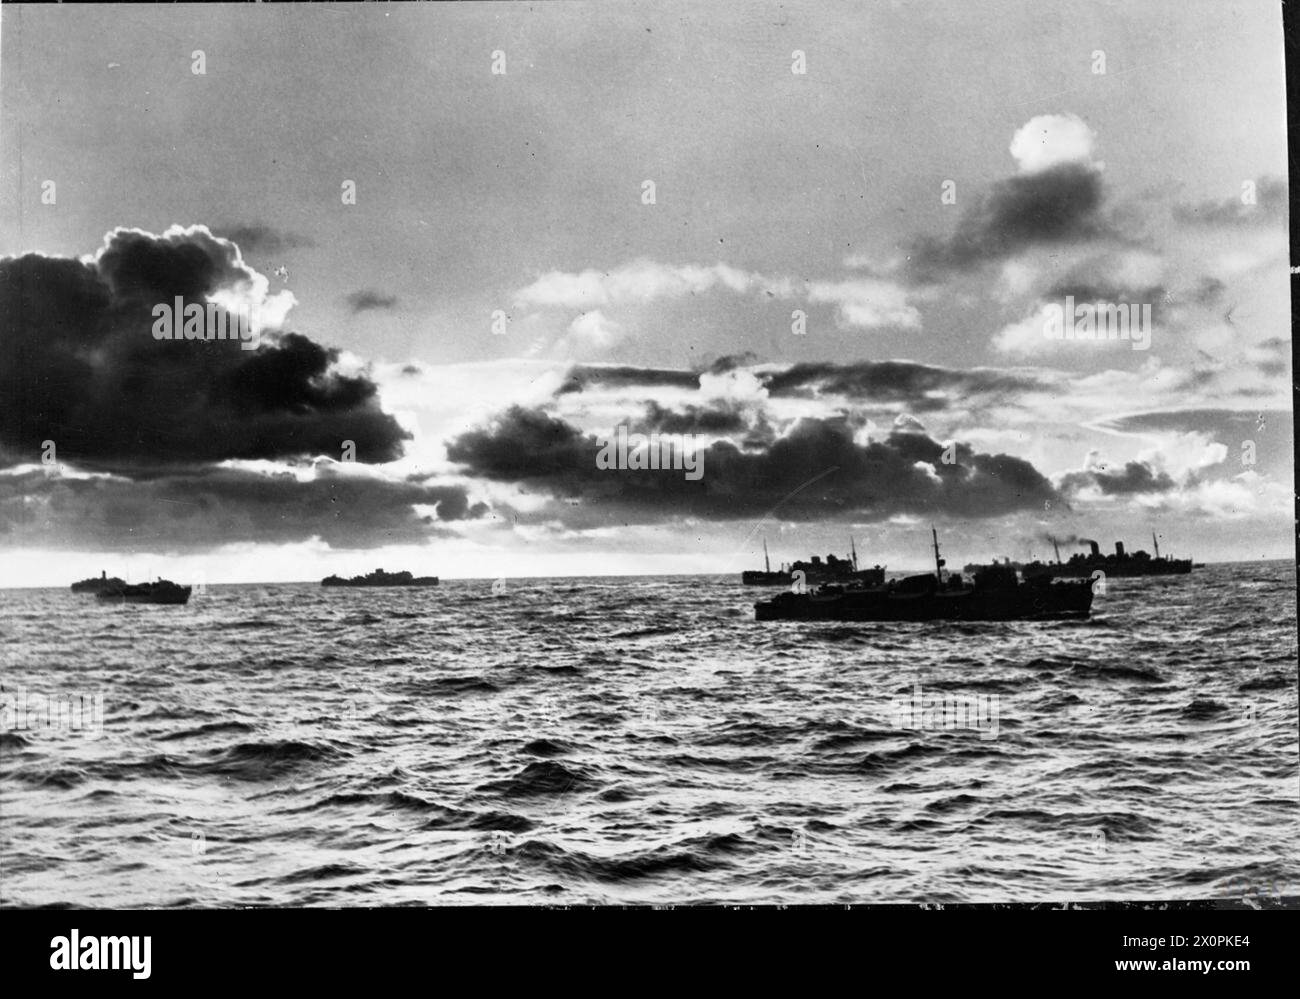 THE BATTLE OF THE ATLANTIC 1939-1945 - Convoys: A large troop convoy on its way to North Africa Royal Navy Stock Photo